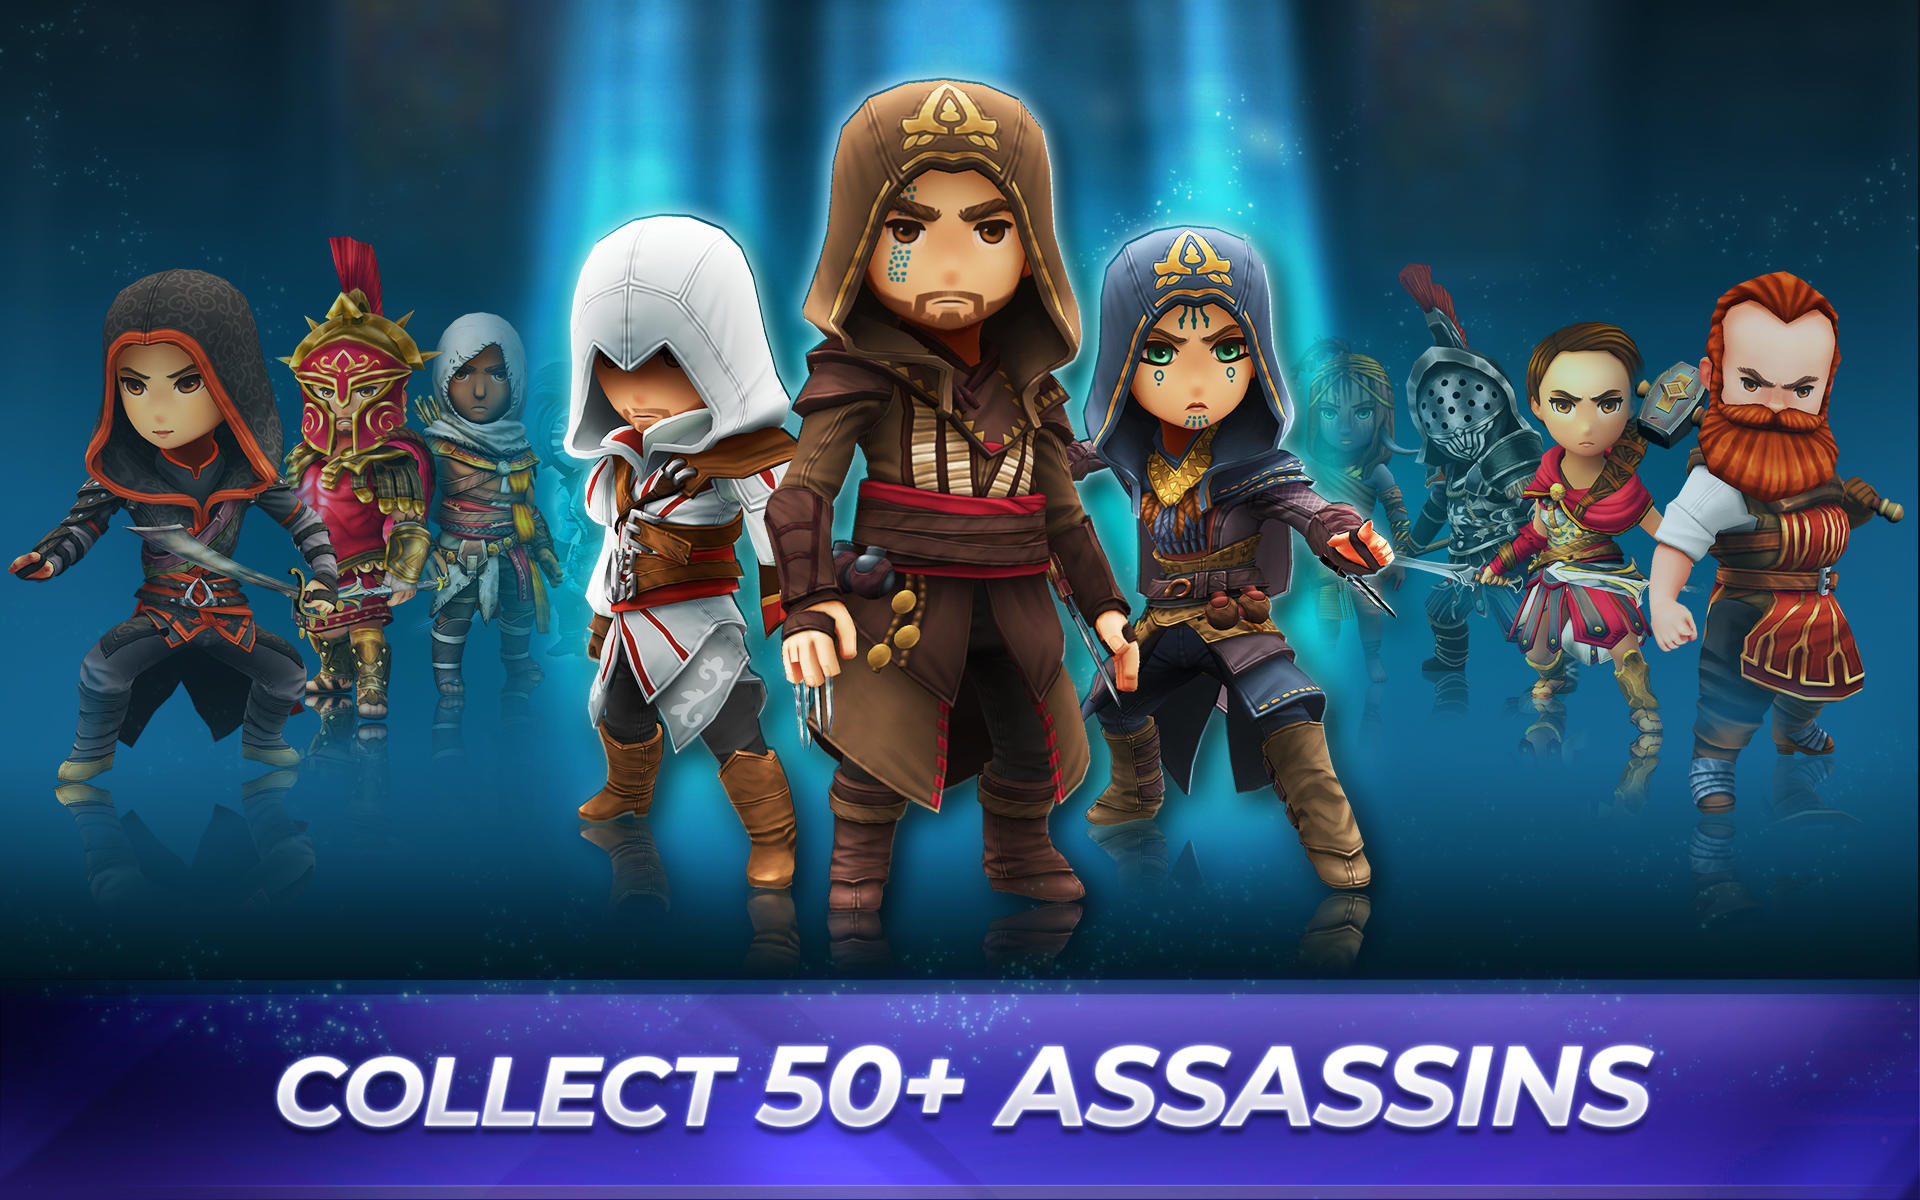 Download Assassin's Creed Rebellion APKs for Android - APKMirror